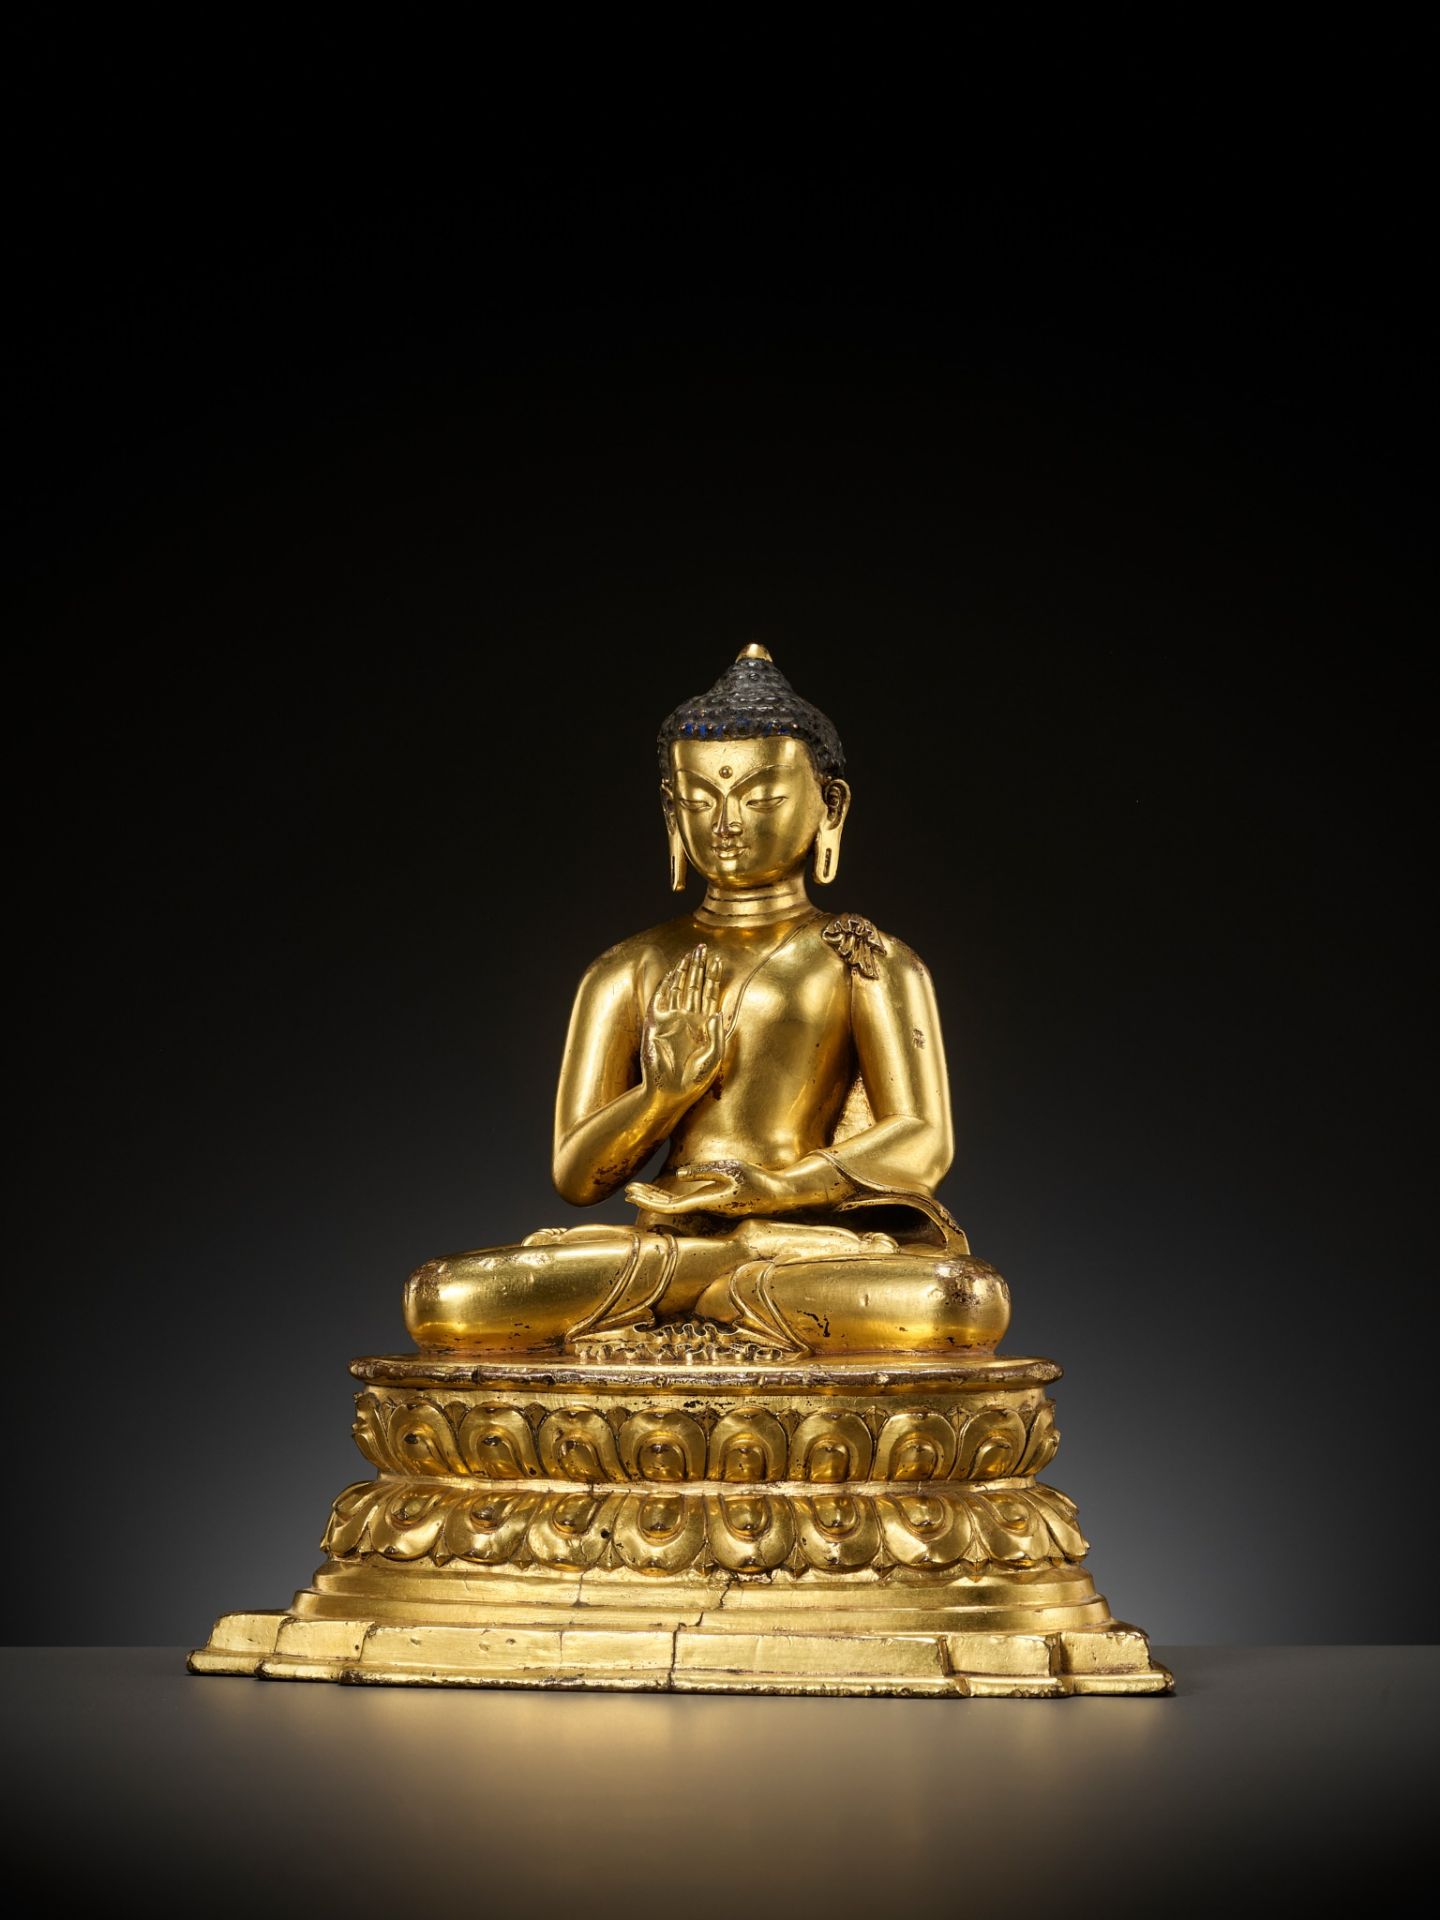 A GILT COPPER ALLOY FIGURE OF AMOGHASIDDHI, POSSIBLY DENSATIL, TIBET, 14TH-15TH CENTURY - Image 8 of 22